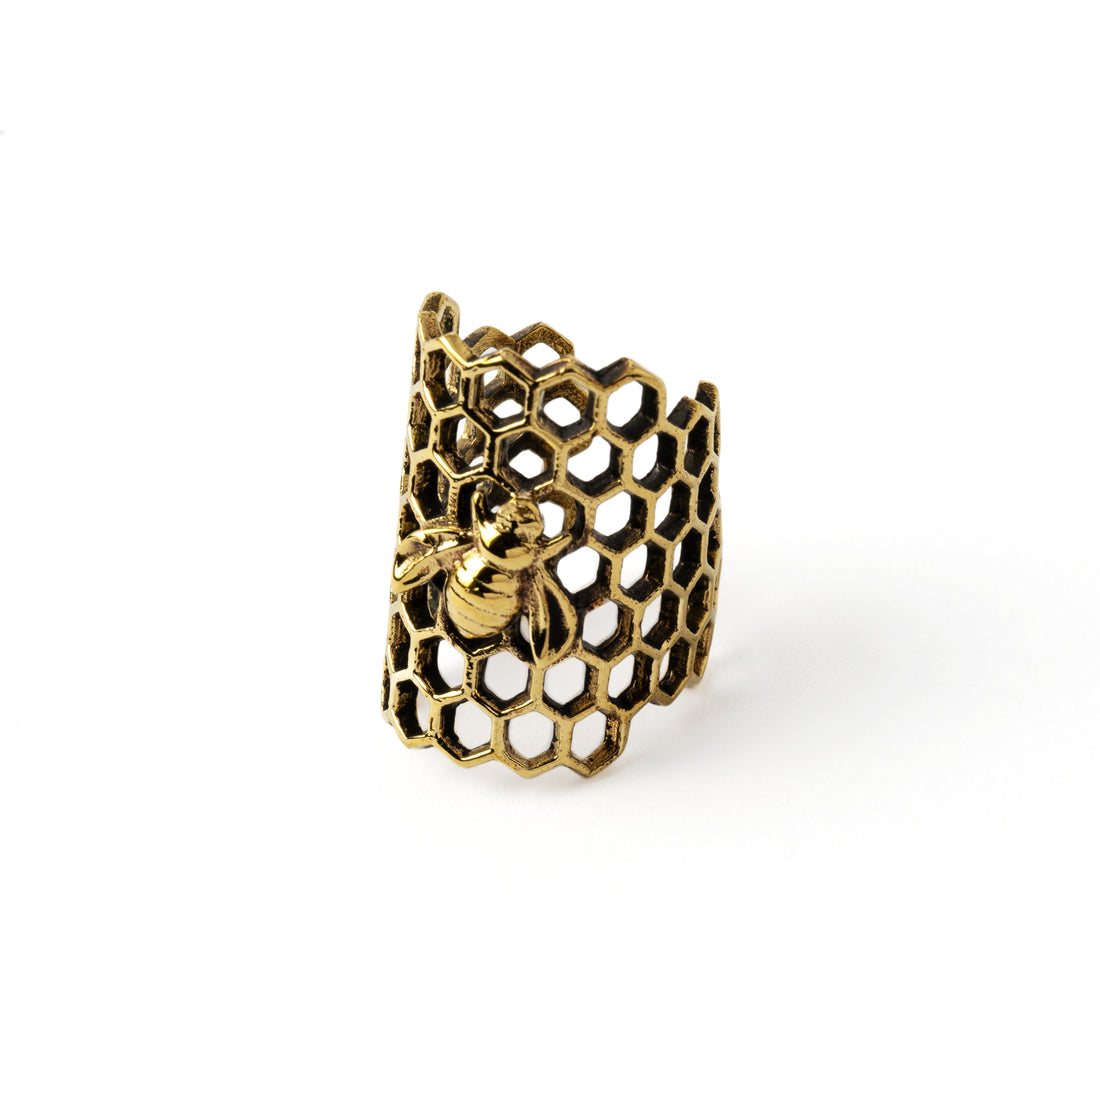 Golden Honeycomb Ear Cuff right side view